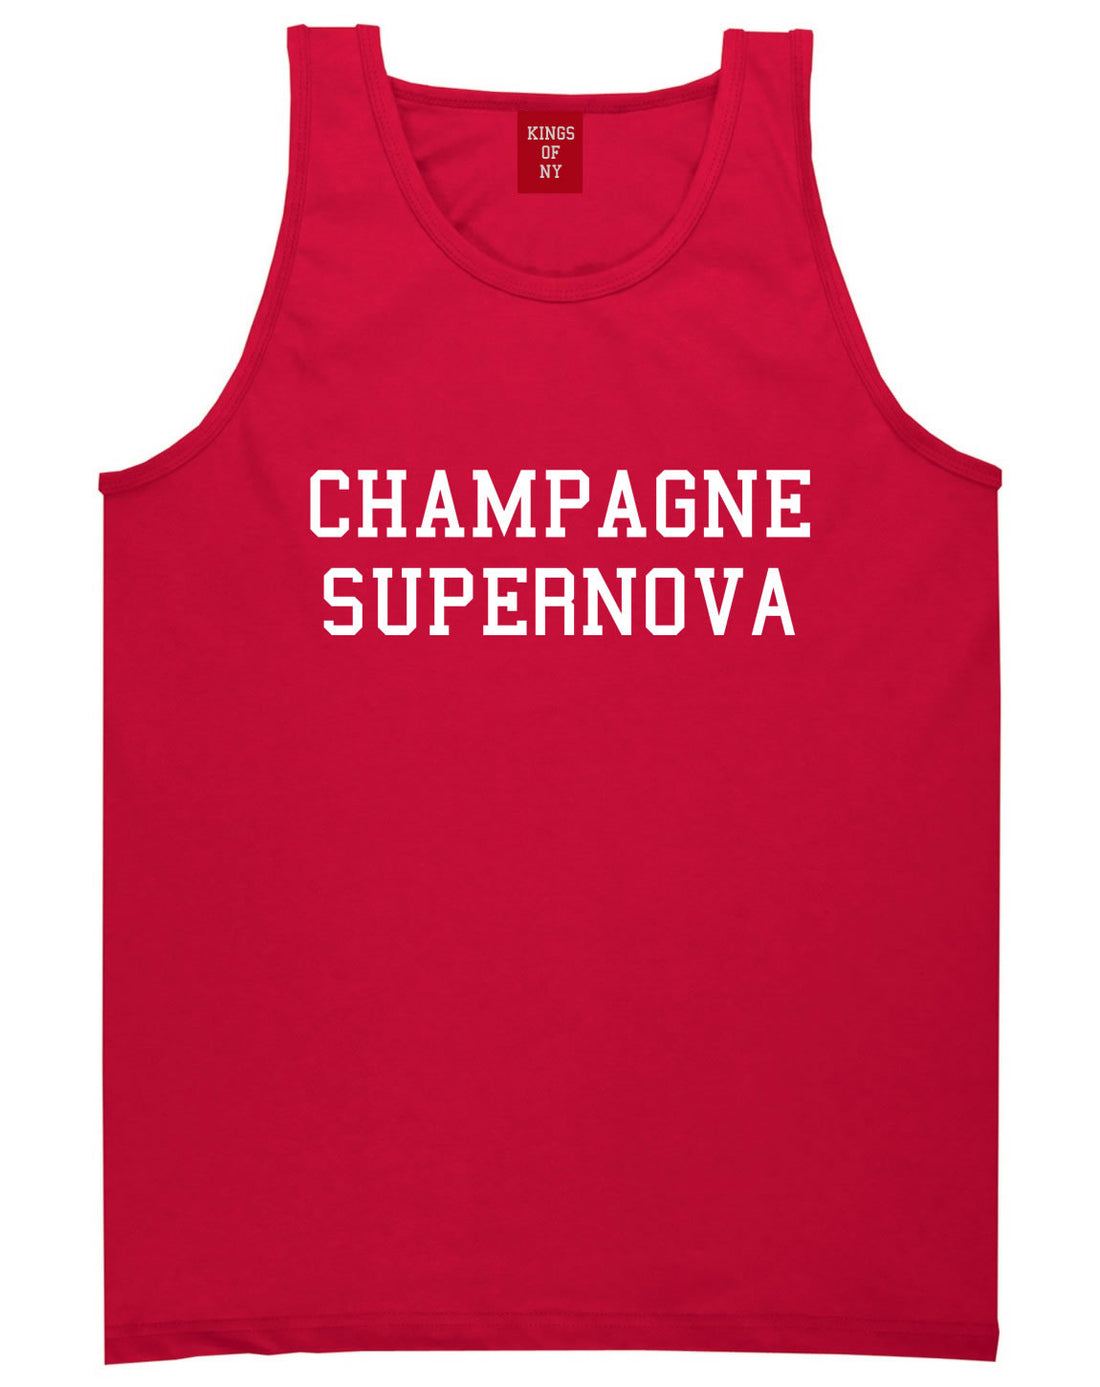 Champagne Supernova Tank Top in Red by Kings Of NY